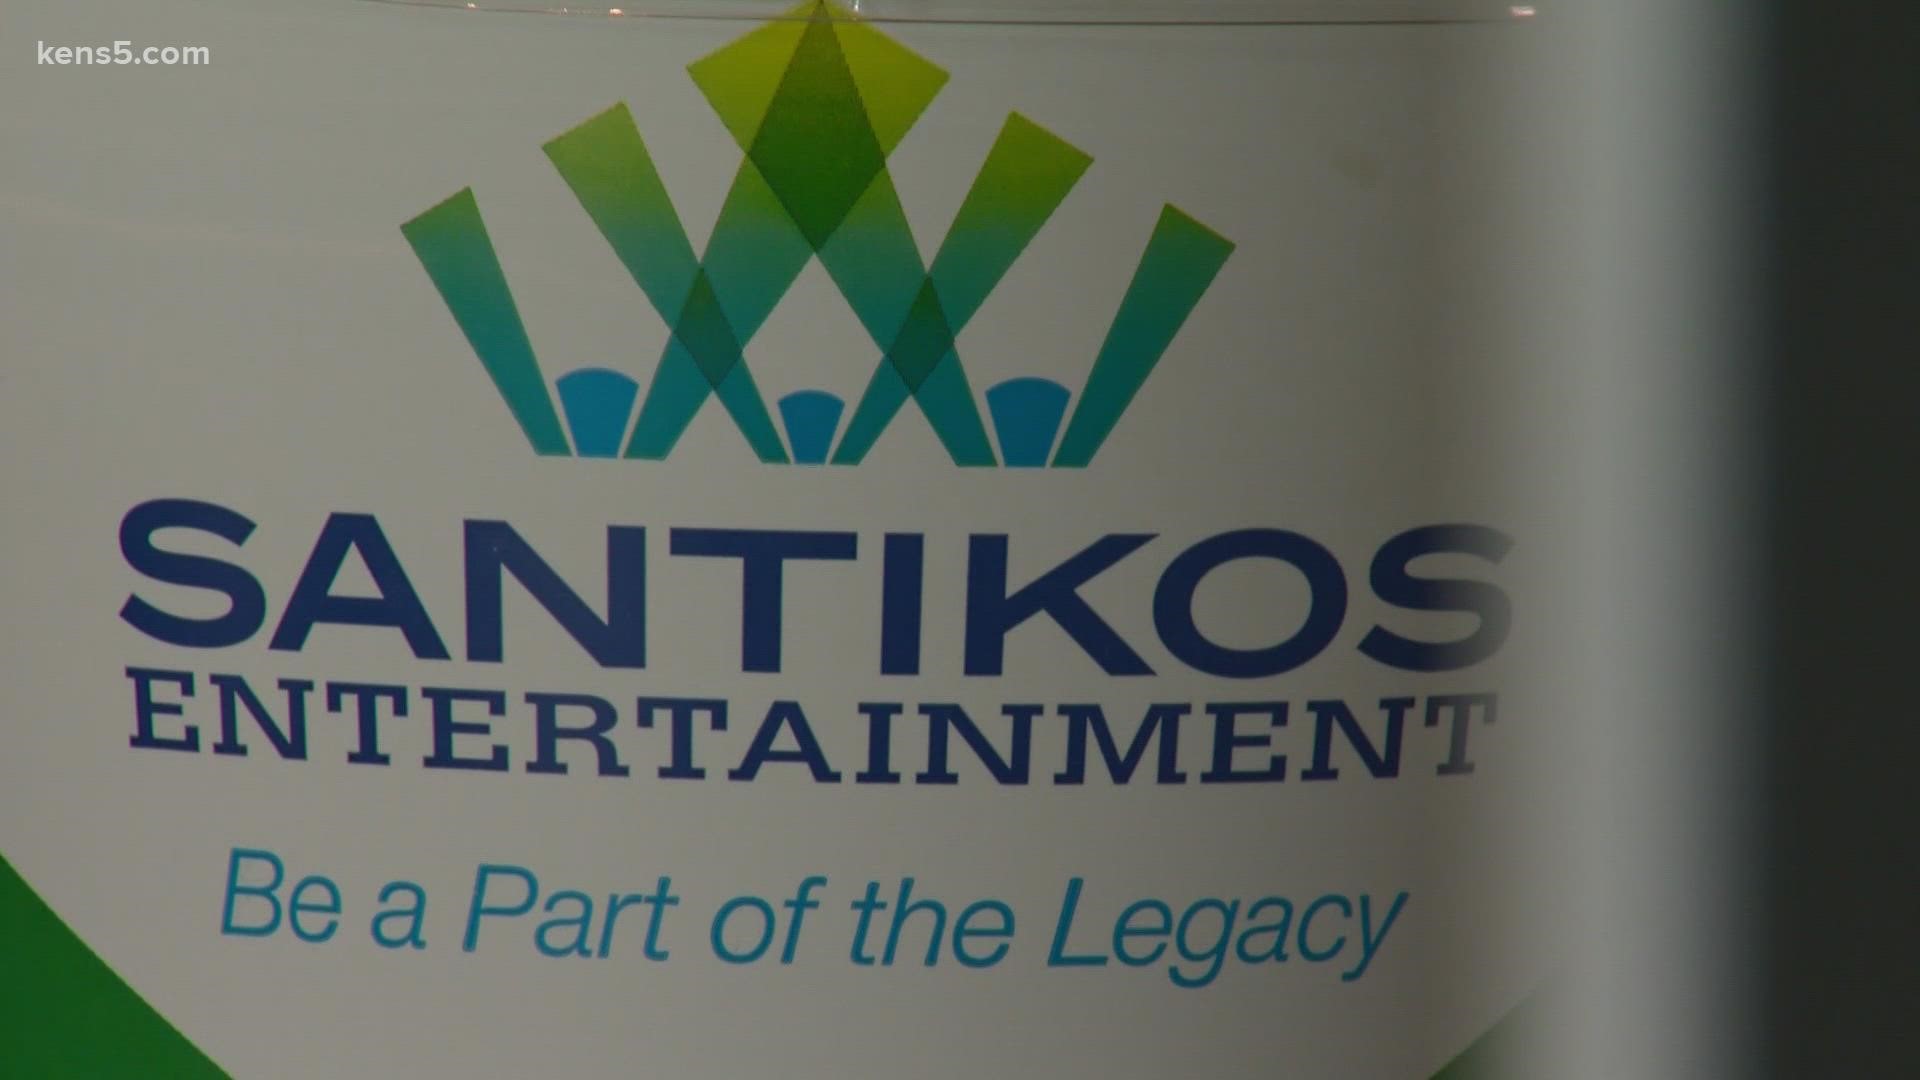 If you're looking for plans this weekend, you can see a movie at the new Santikos in New Braunfels.